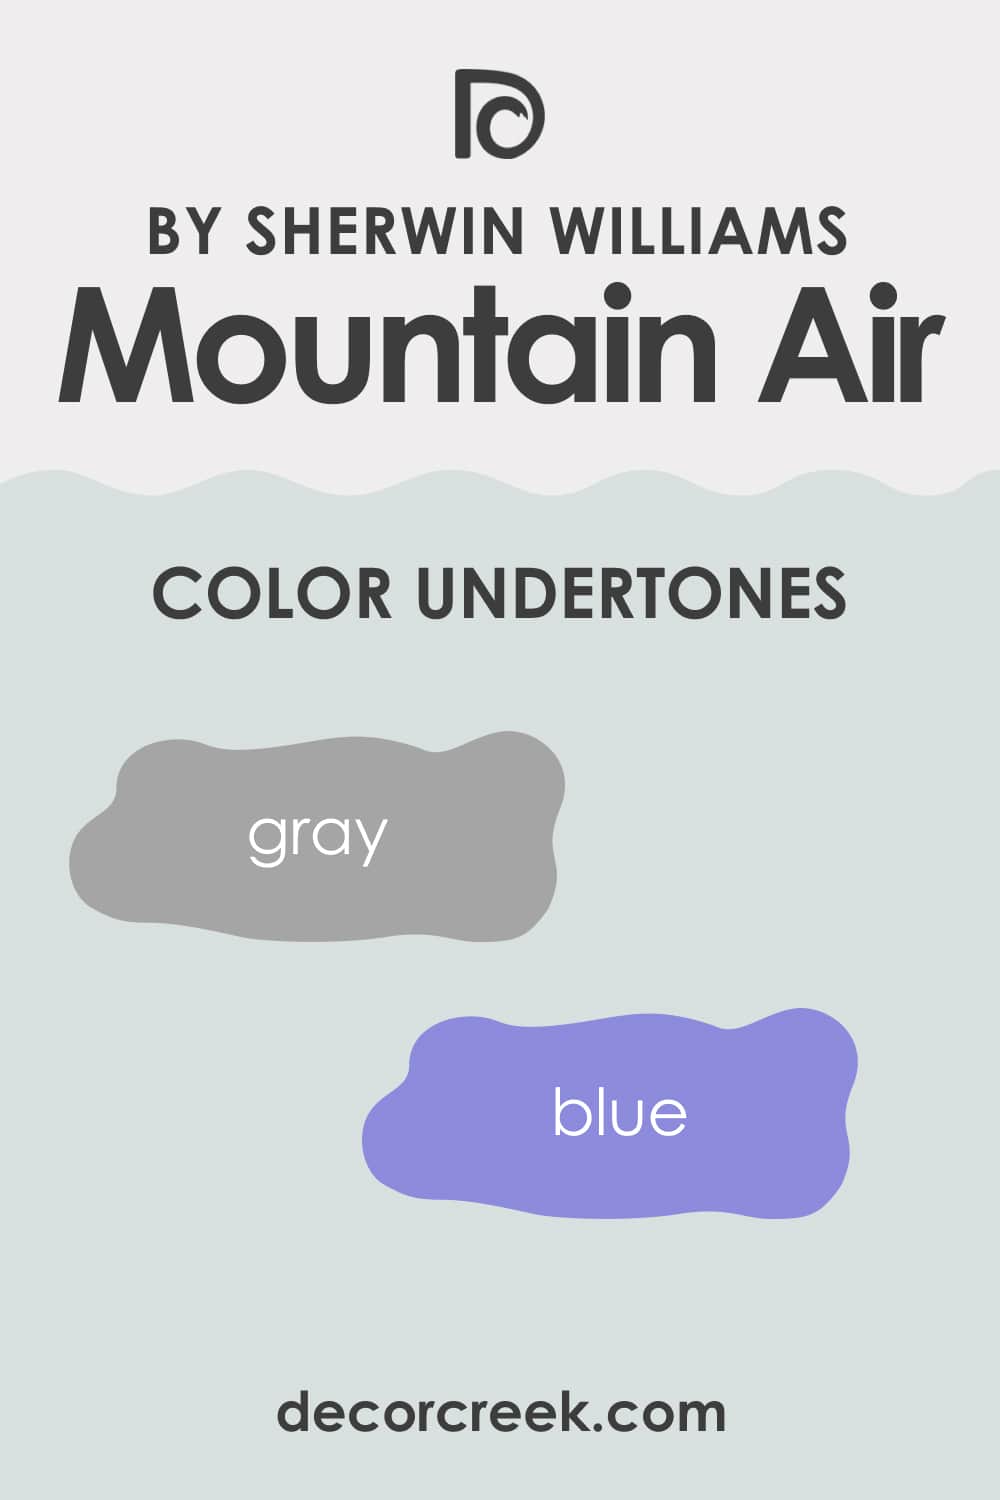 What Undertones Does SW Mountain Air Color Has?